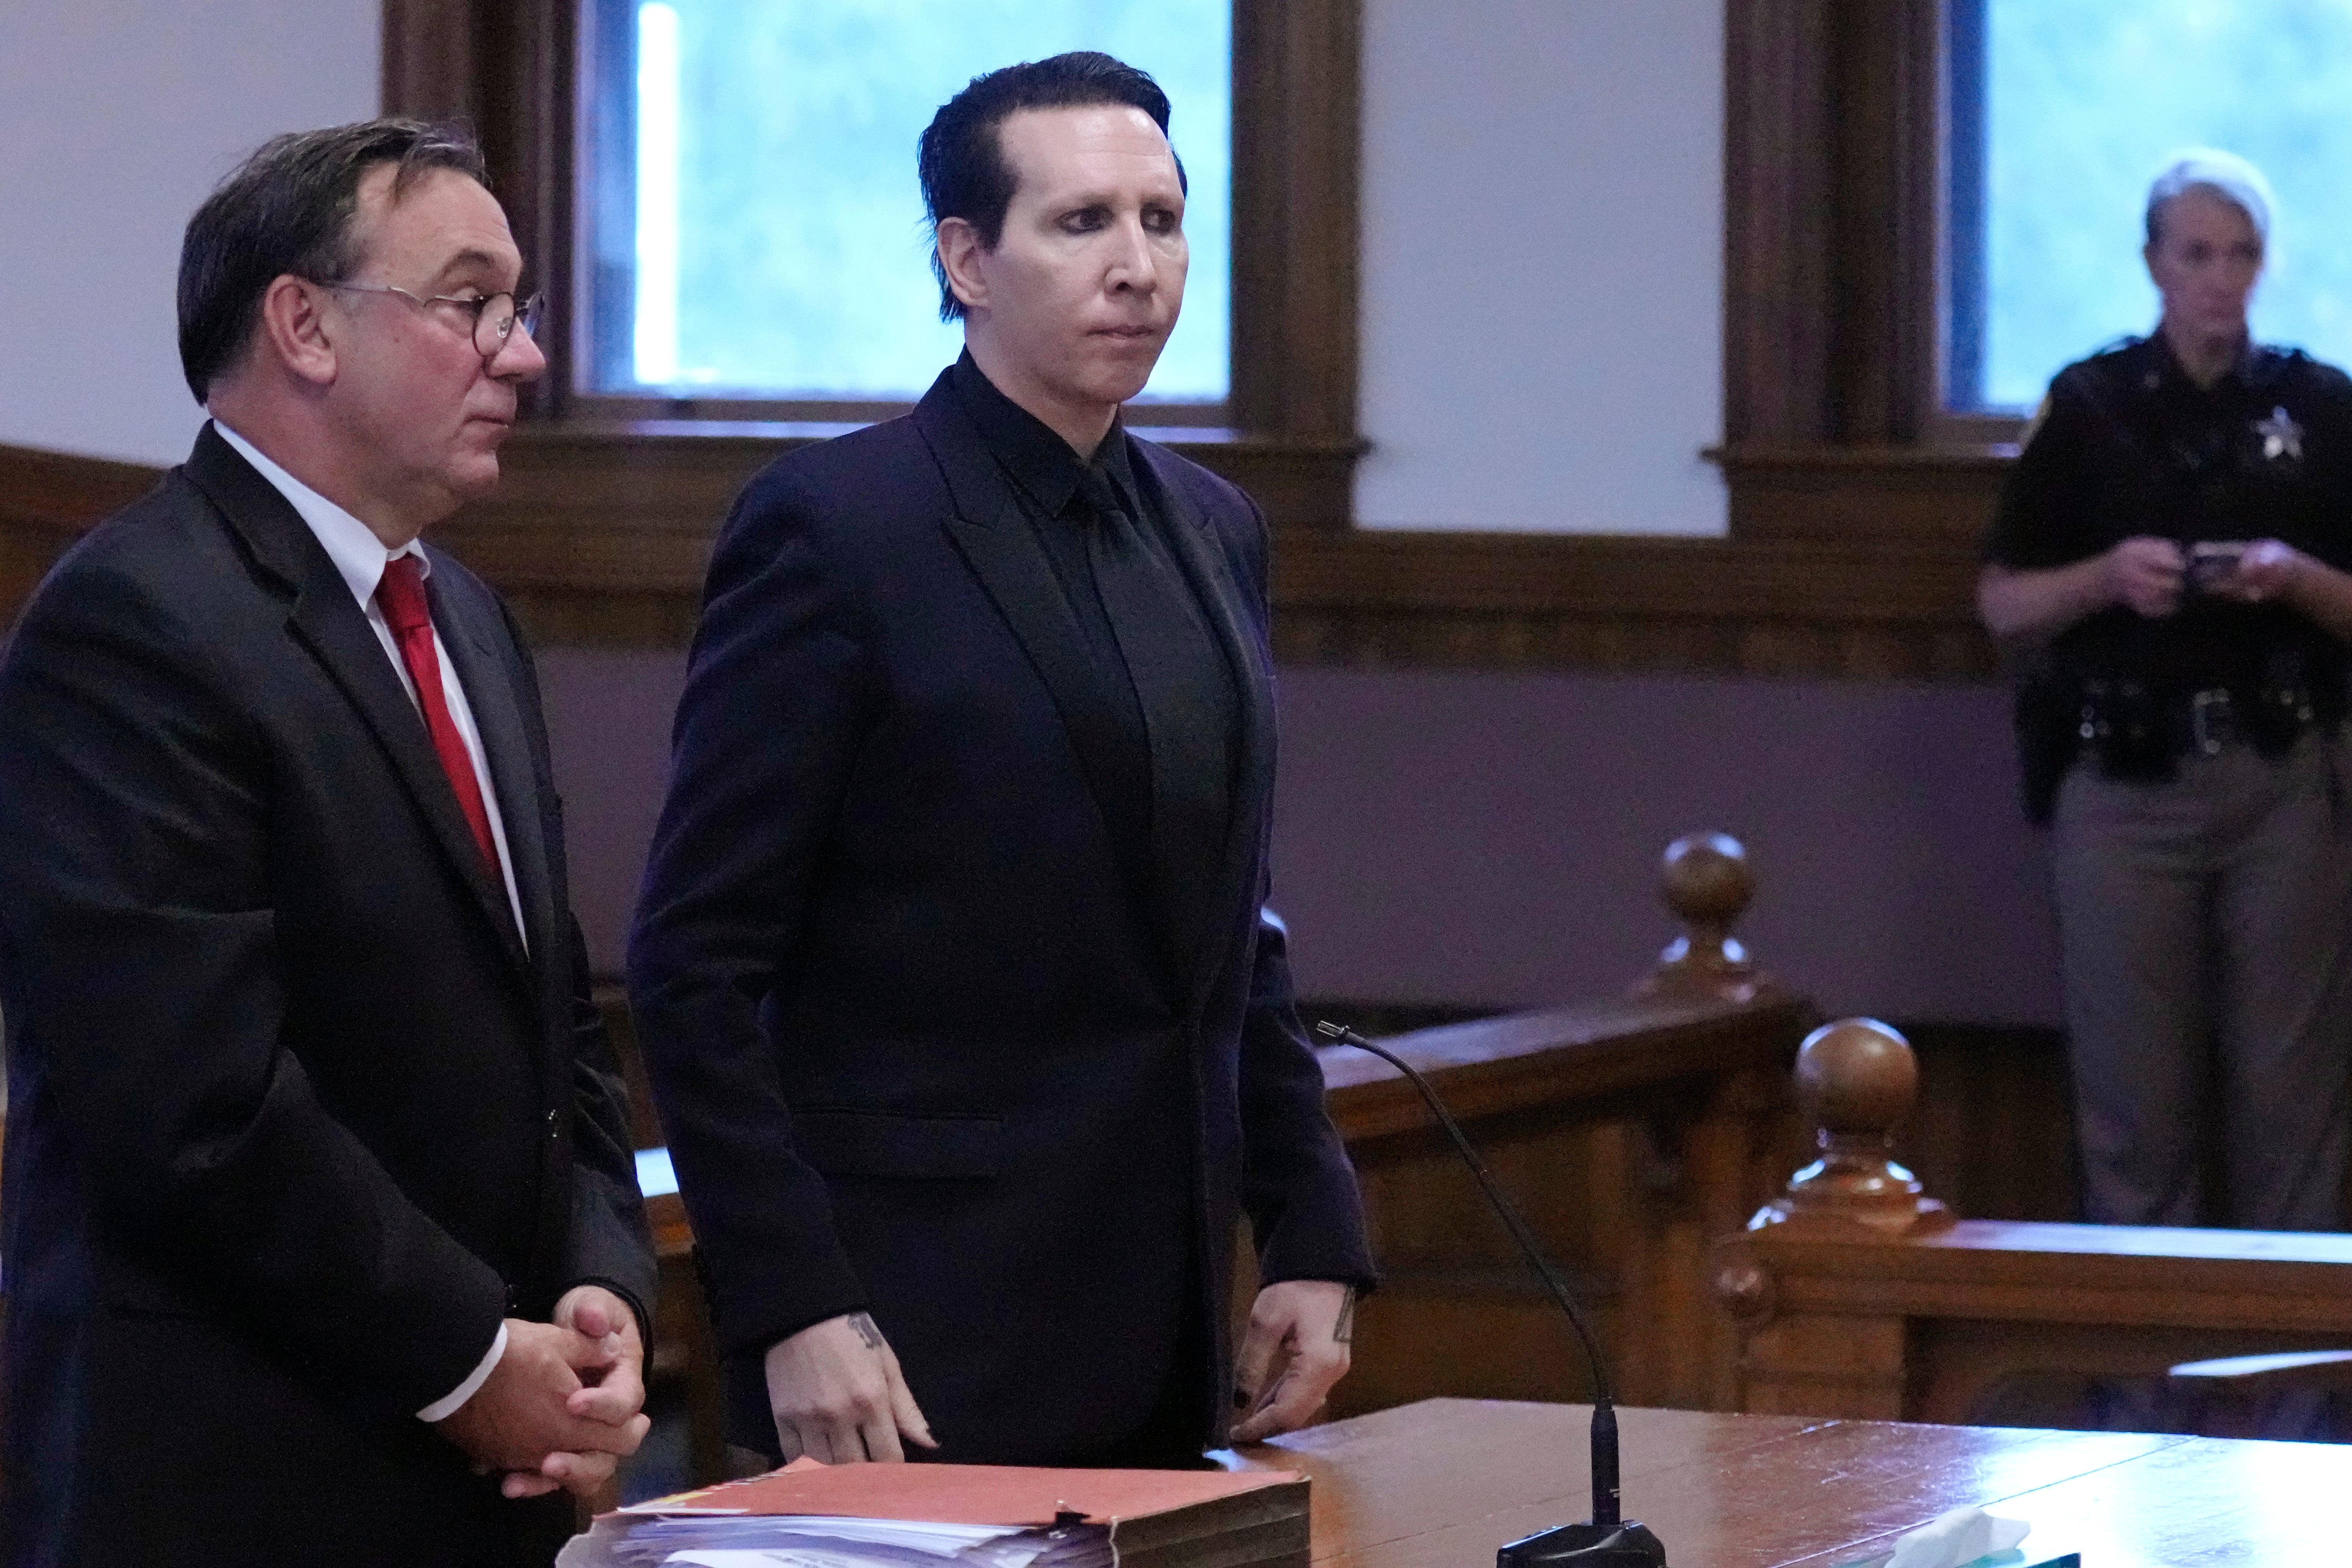 Musical artist Marilyn Manson, whose legal name is Brian Hugh Warner, center, stands with his attorney